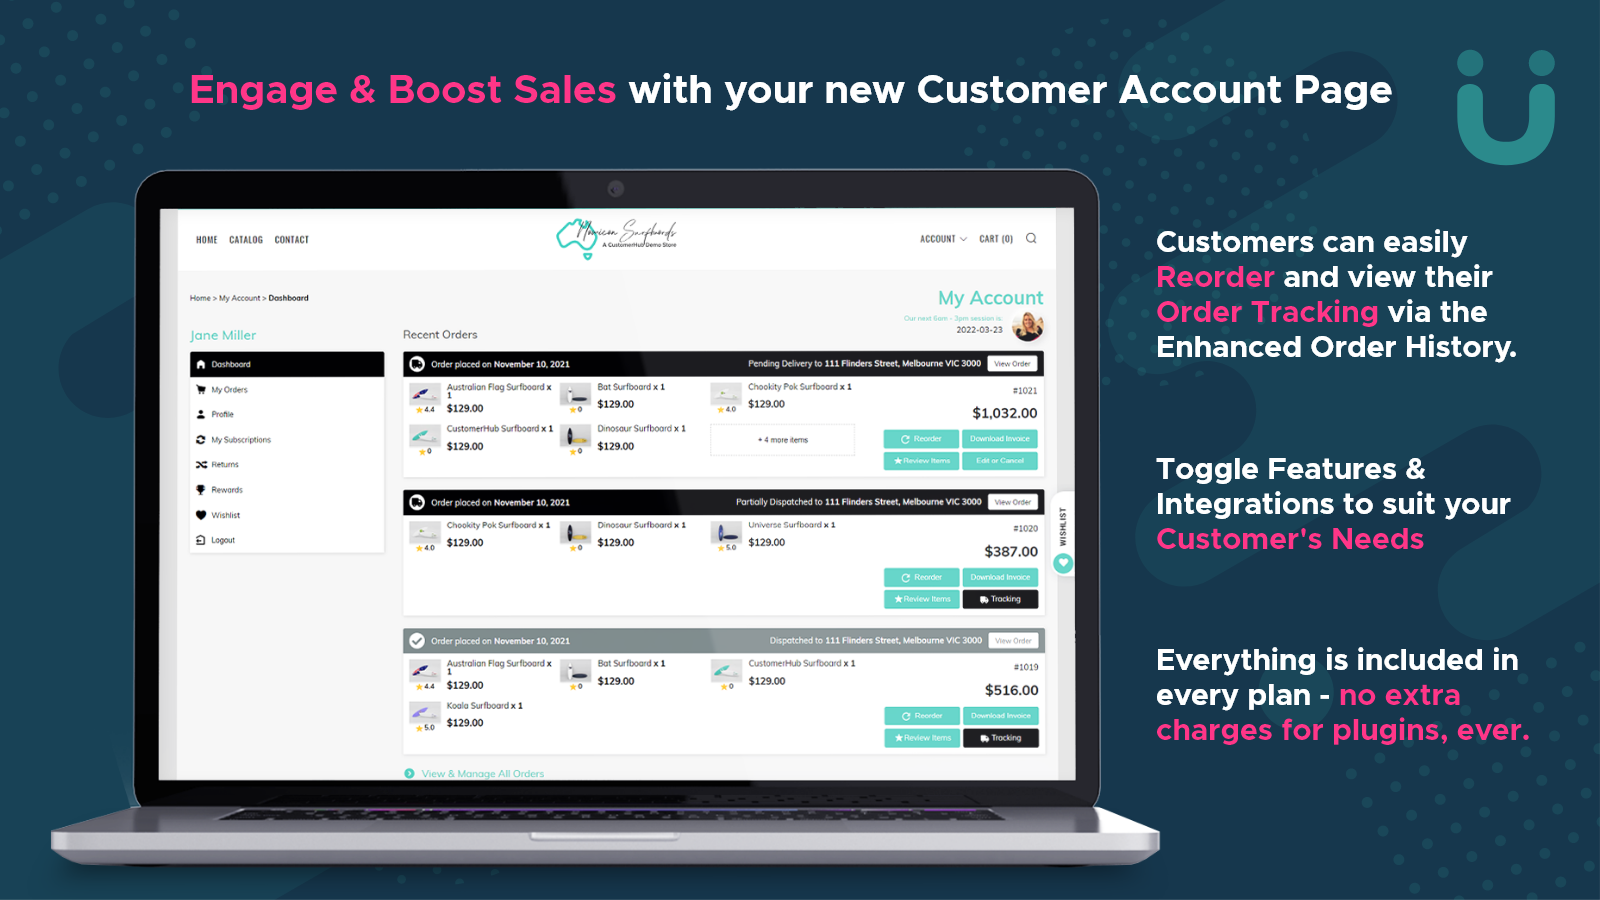 Engage & Boost Sales with your new Customer Account Page